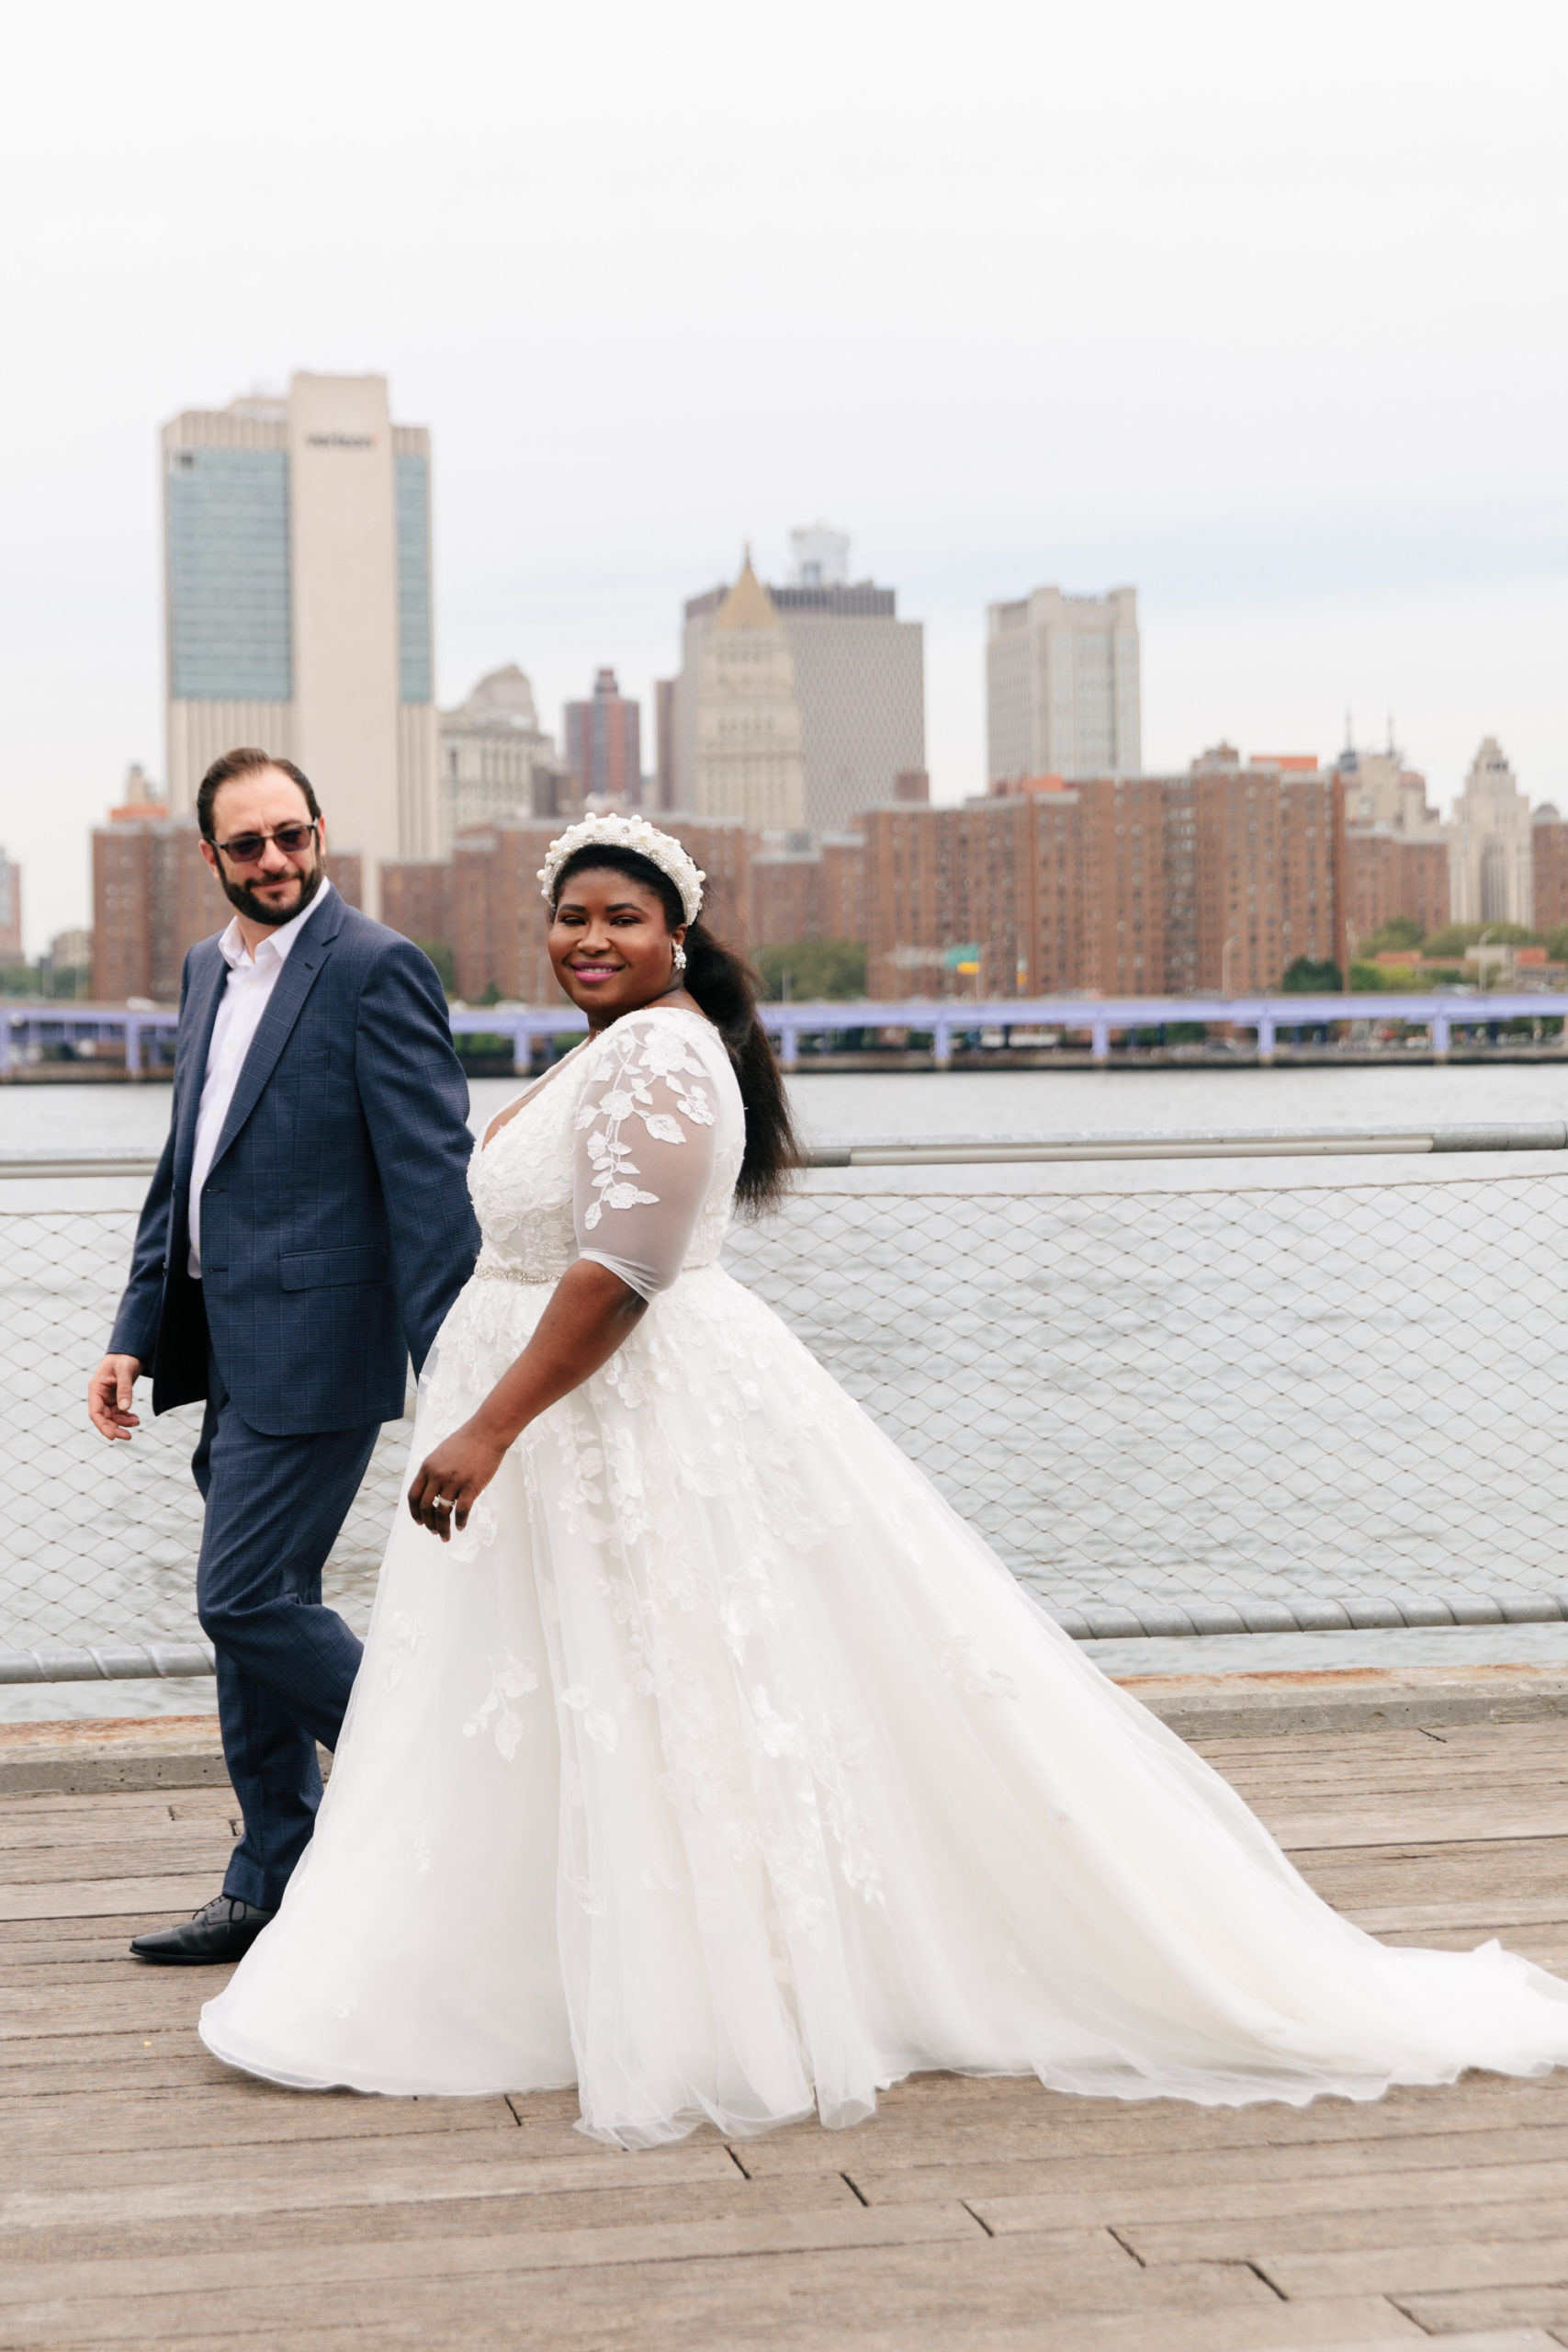 Our civil ceremony in New York City